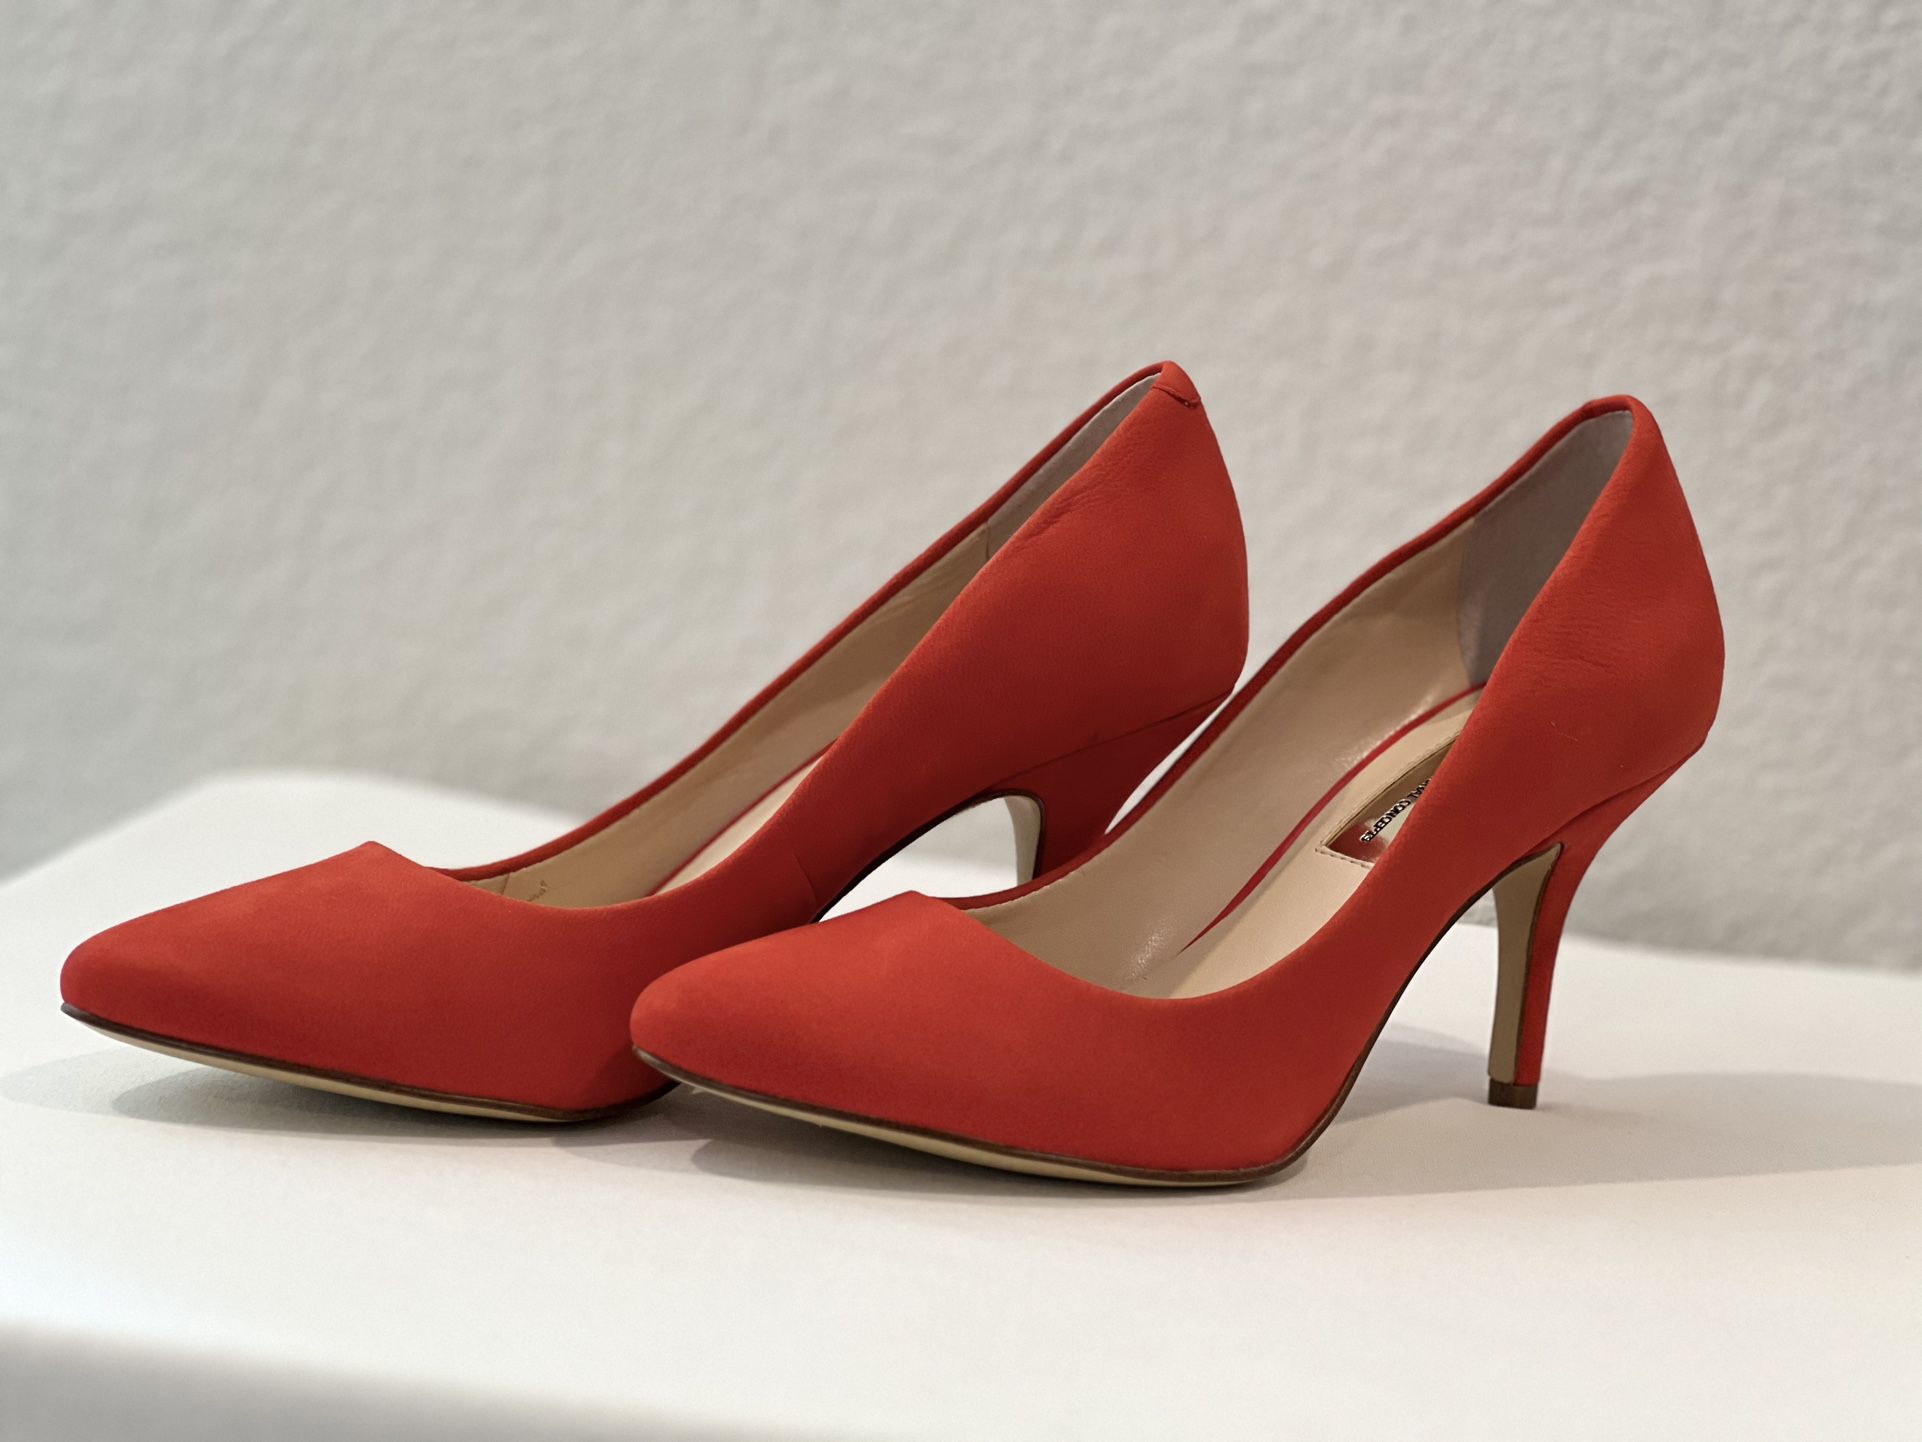 Inc International Concepts Shoes | Inc Zitah Pointed Toe Suede Pumps In Tangerine Red, Sz 6 